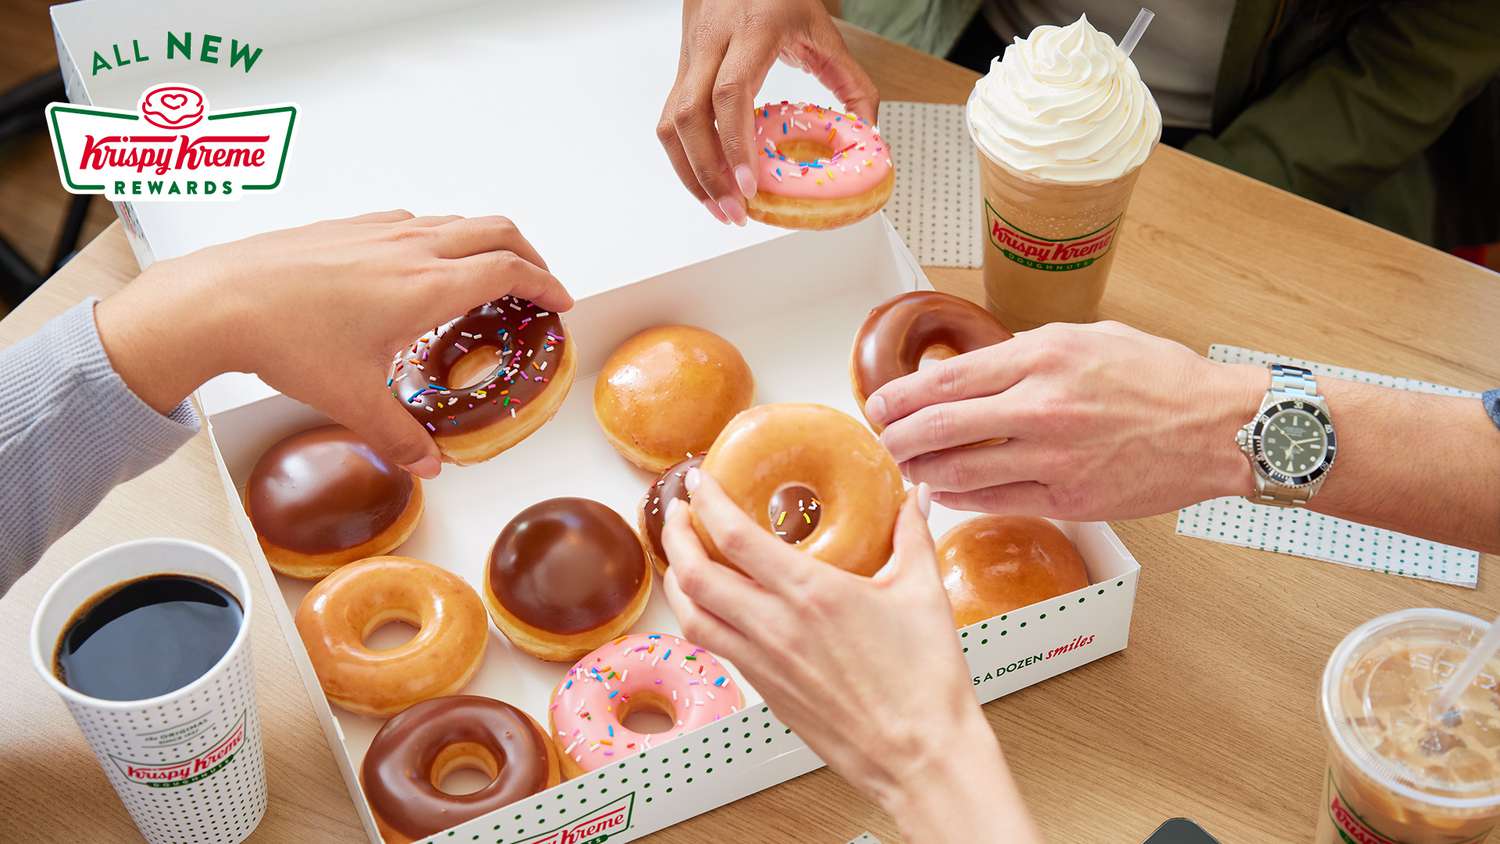 Krispy Kreme Rolls Out New Rewards With Two Weeks of Free Donuts and Coffee Deals